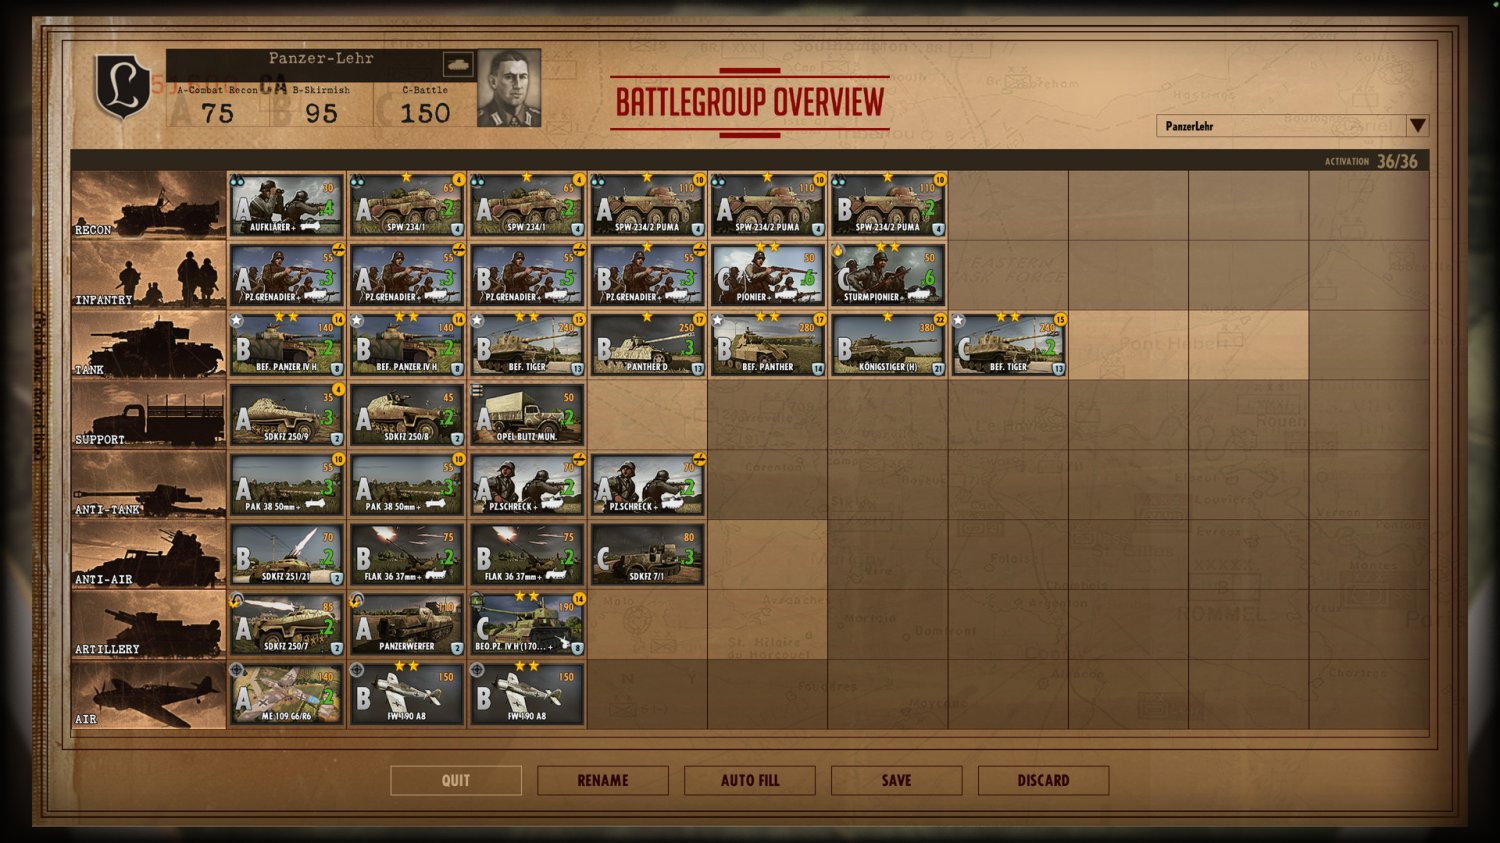 download steam steel division normandy 44